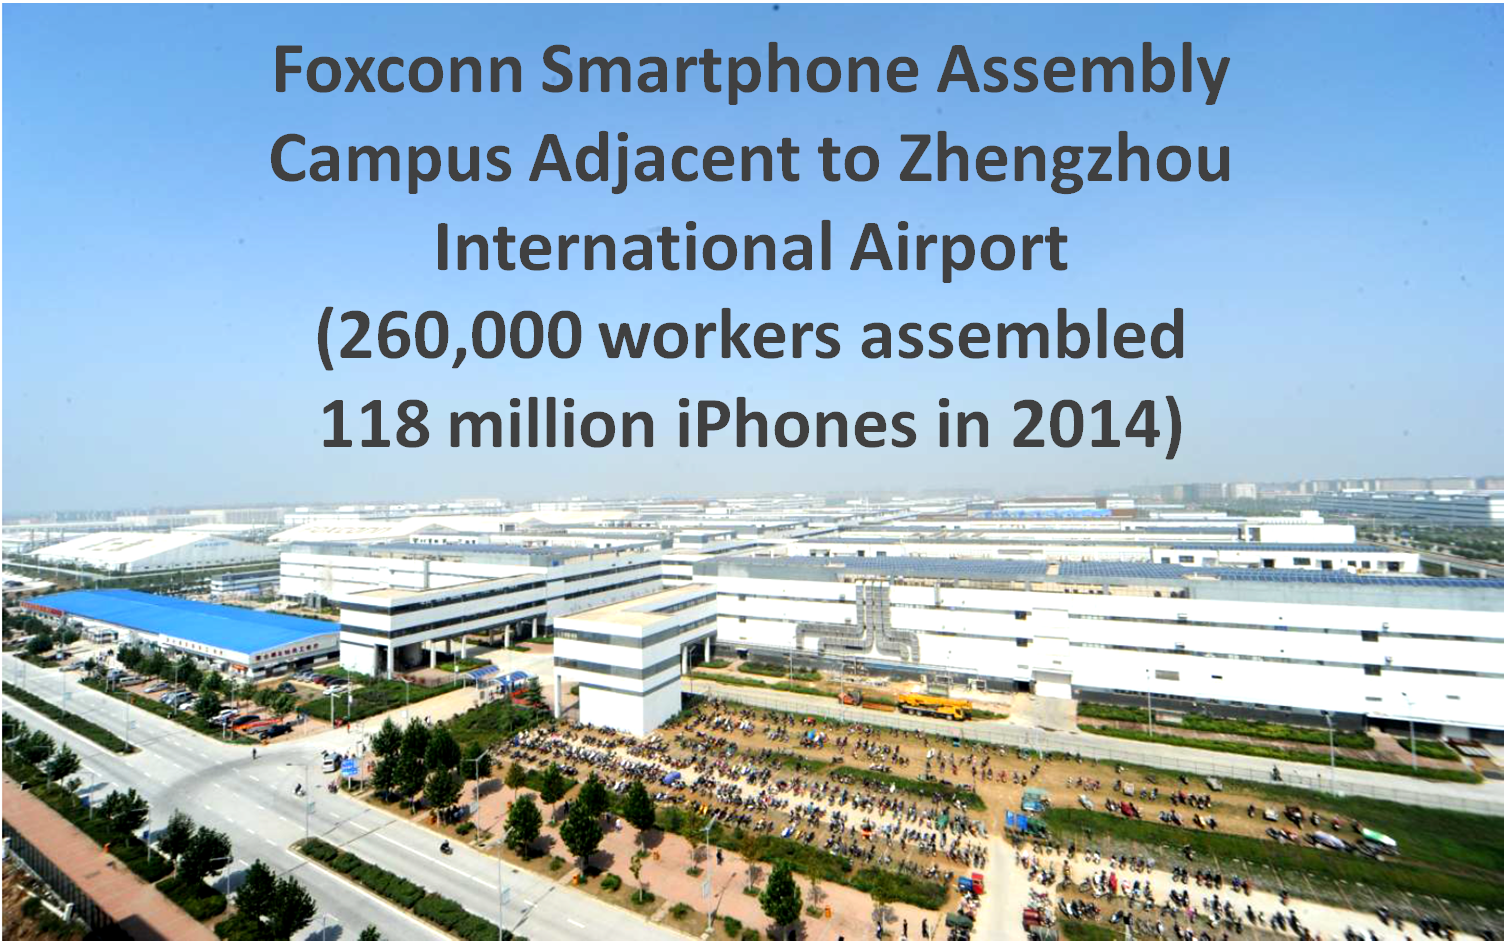 13 - Foxconn iPhone Assembly Campus.png